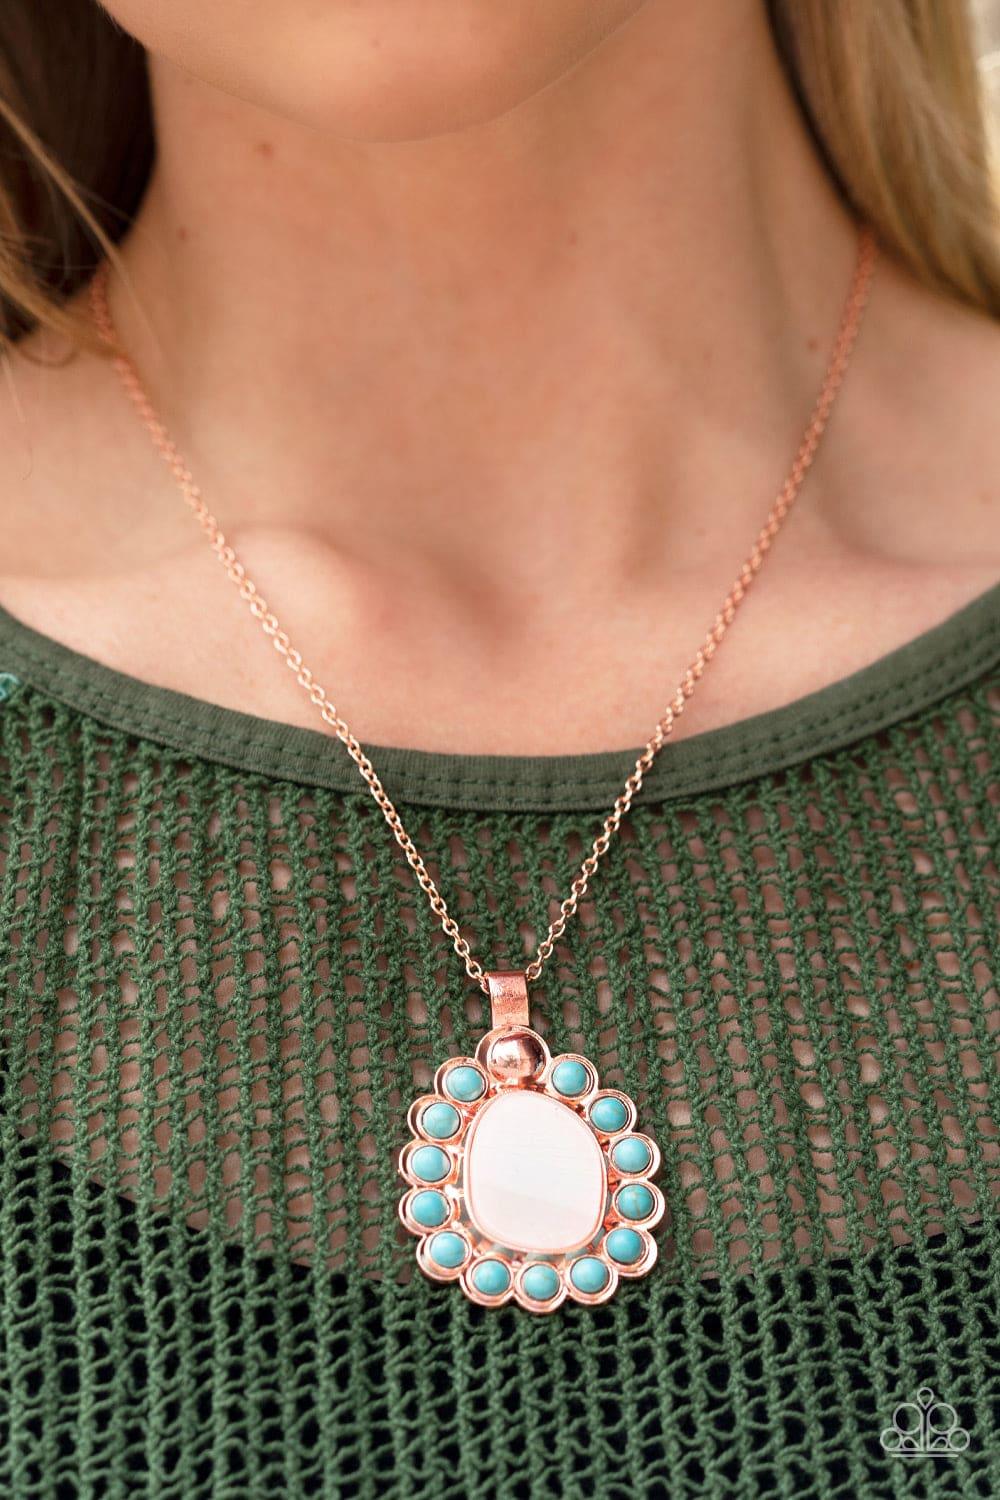 Paparazzi Accessories - Sahara Sea - Copper Necklace - Bling by JessieK